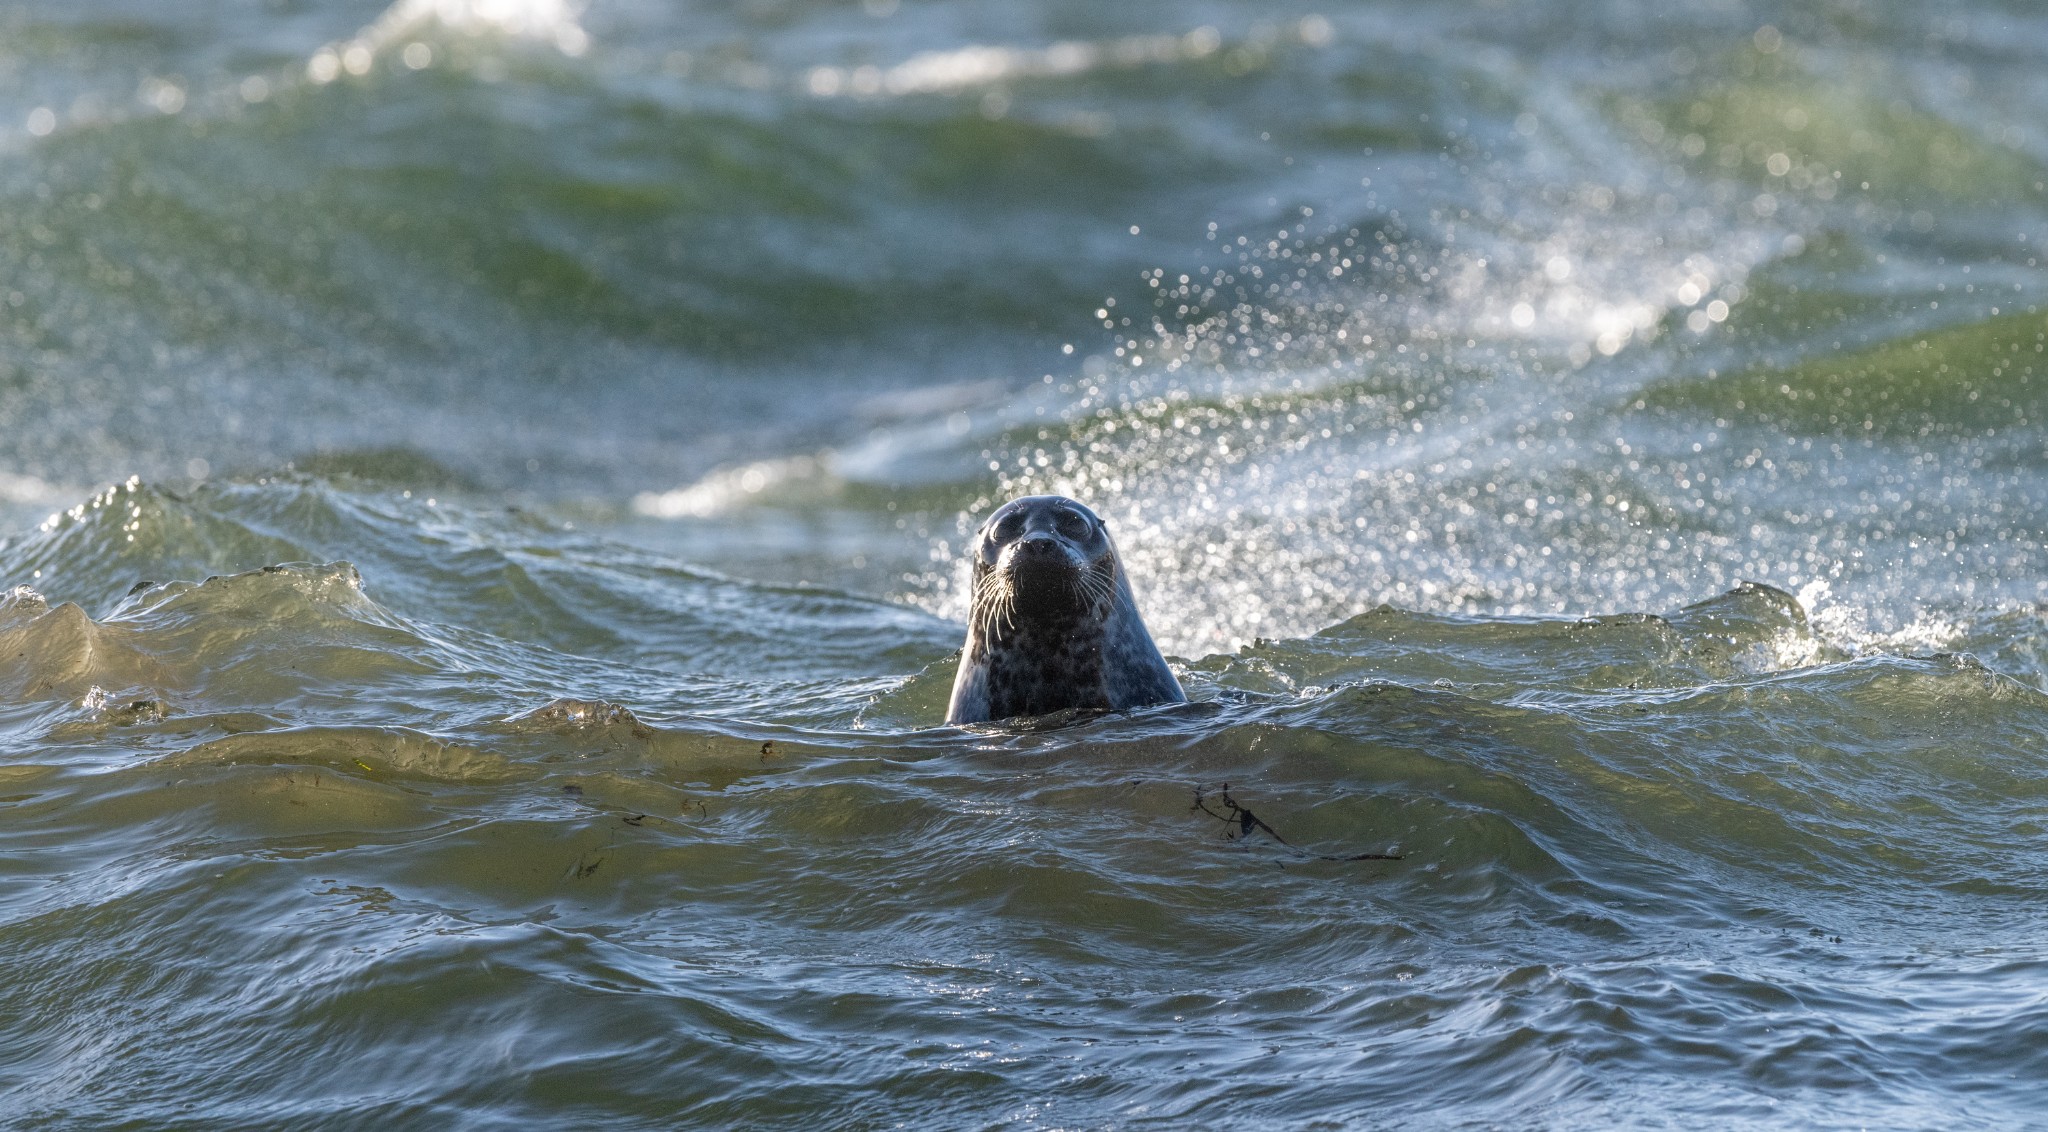 Harbour seal at Scapa, Orkney - image by Raymond Besant